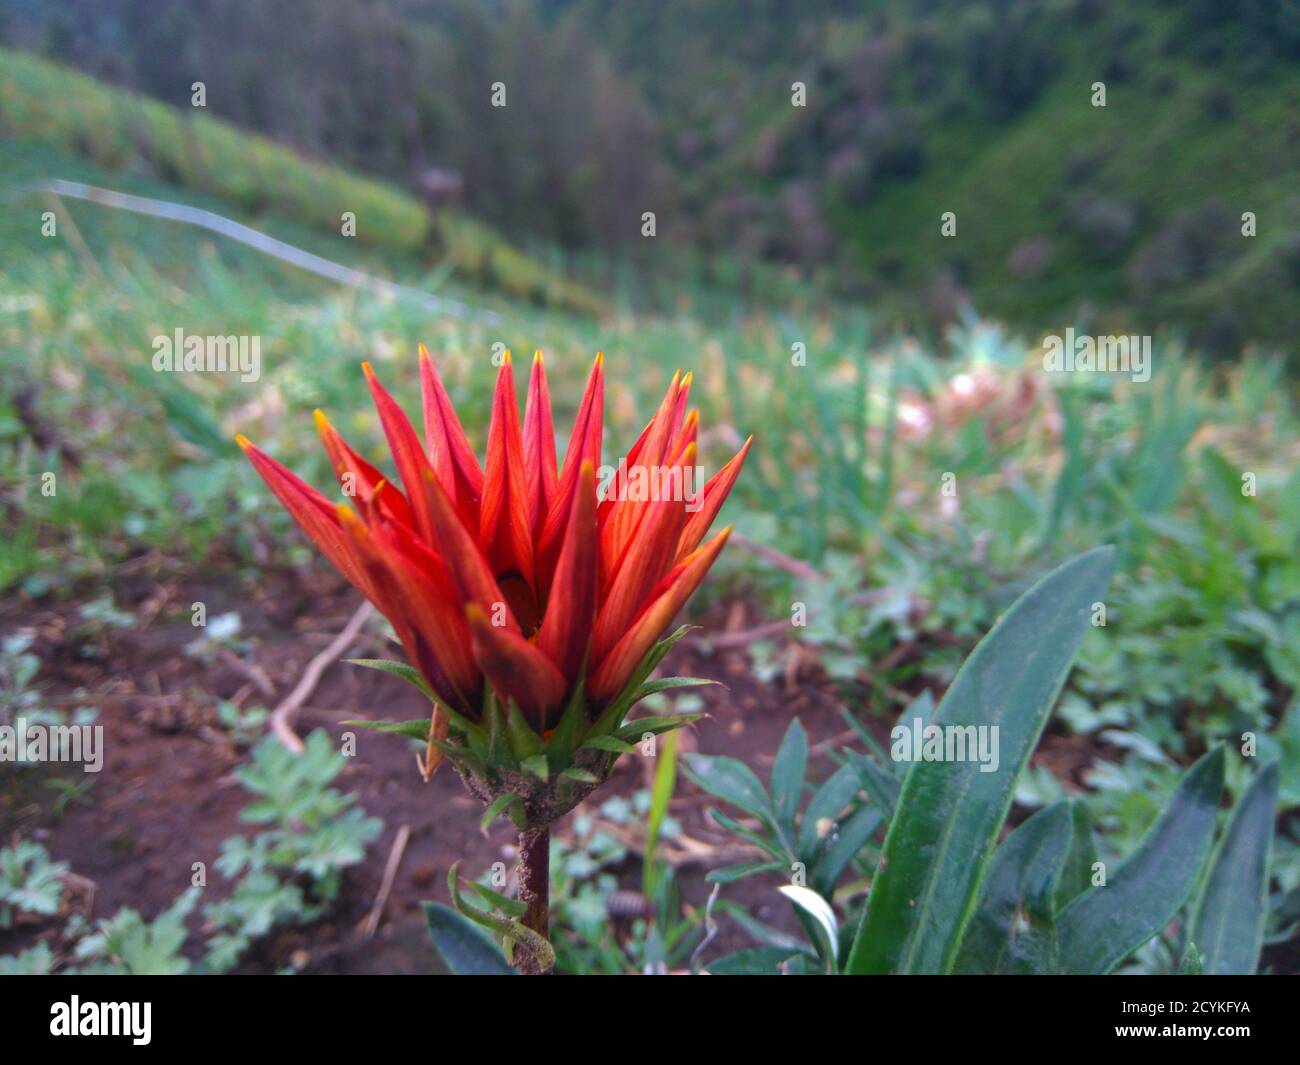 Beautiful Red Castilleja Plant also known as Indian Paintbrush Grows In Mountains. Stock Photo